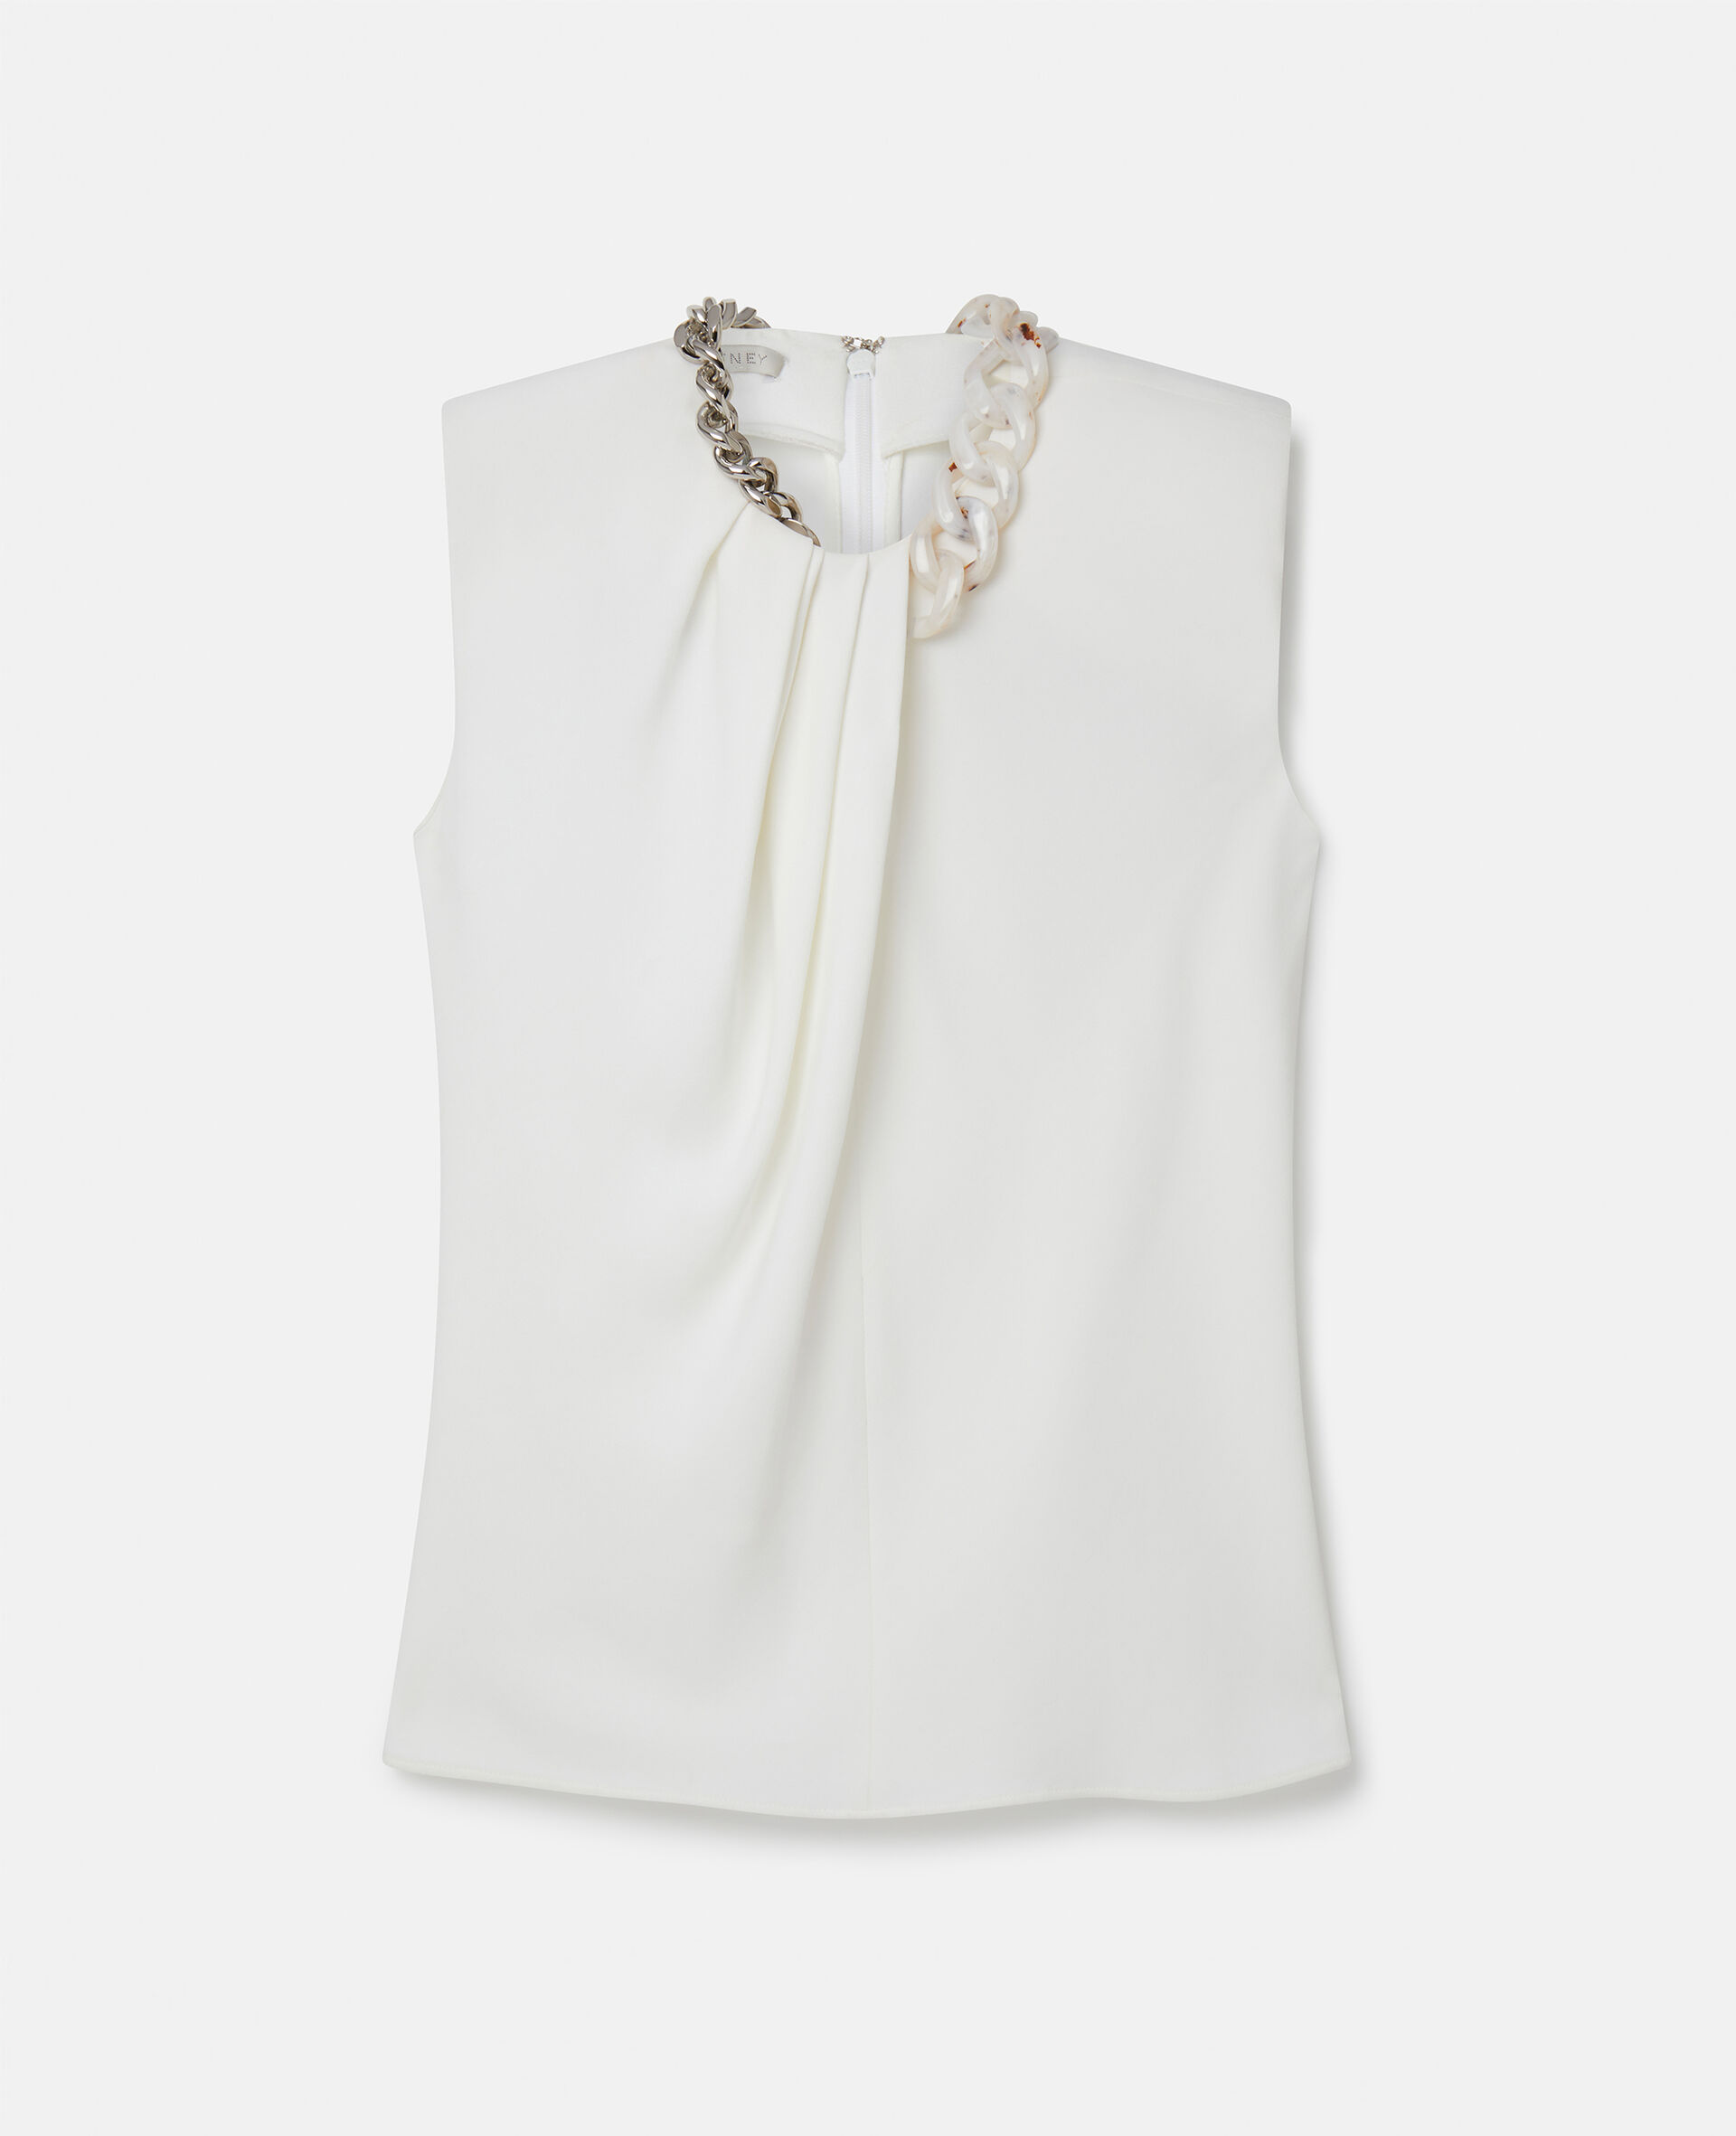 Falabella Chain Top-White-large image number 0